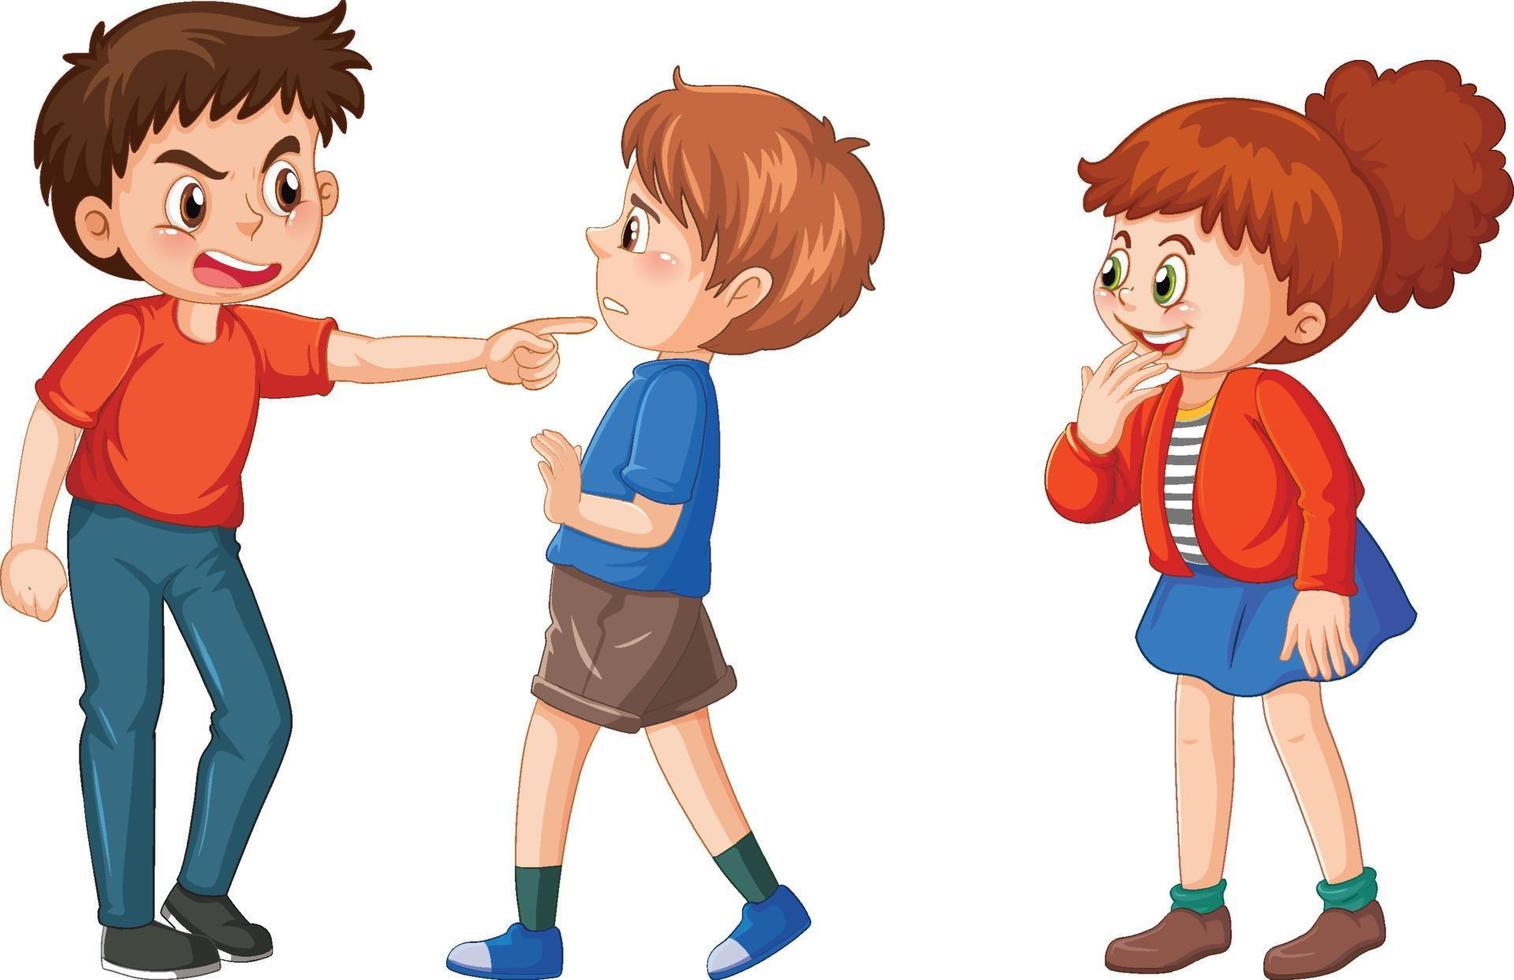 A boy abused by other kids vector